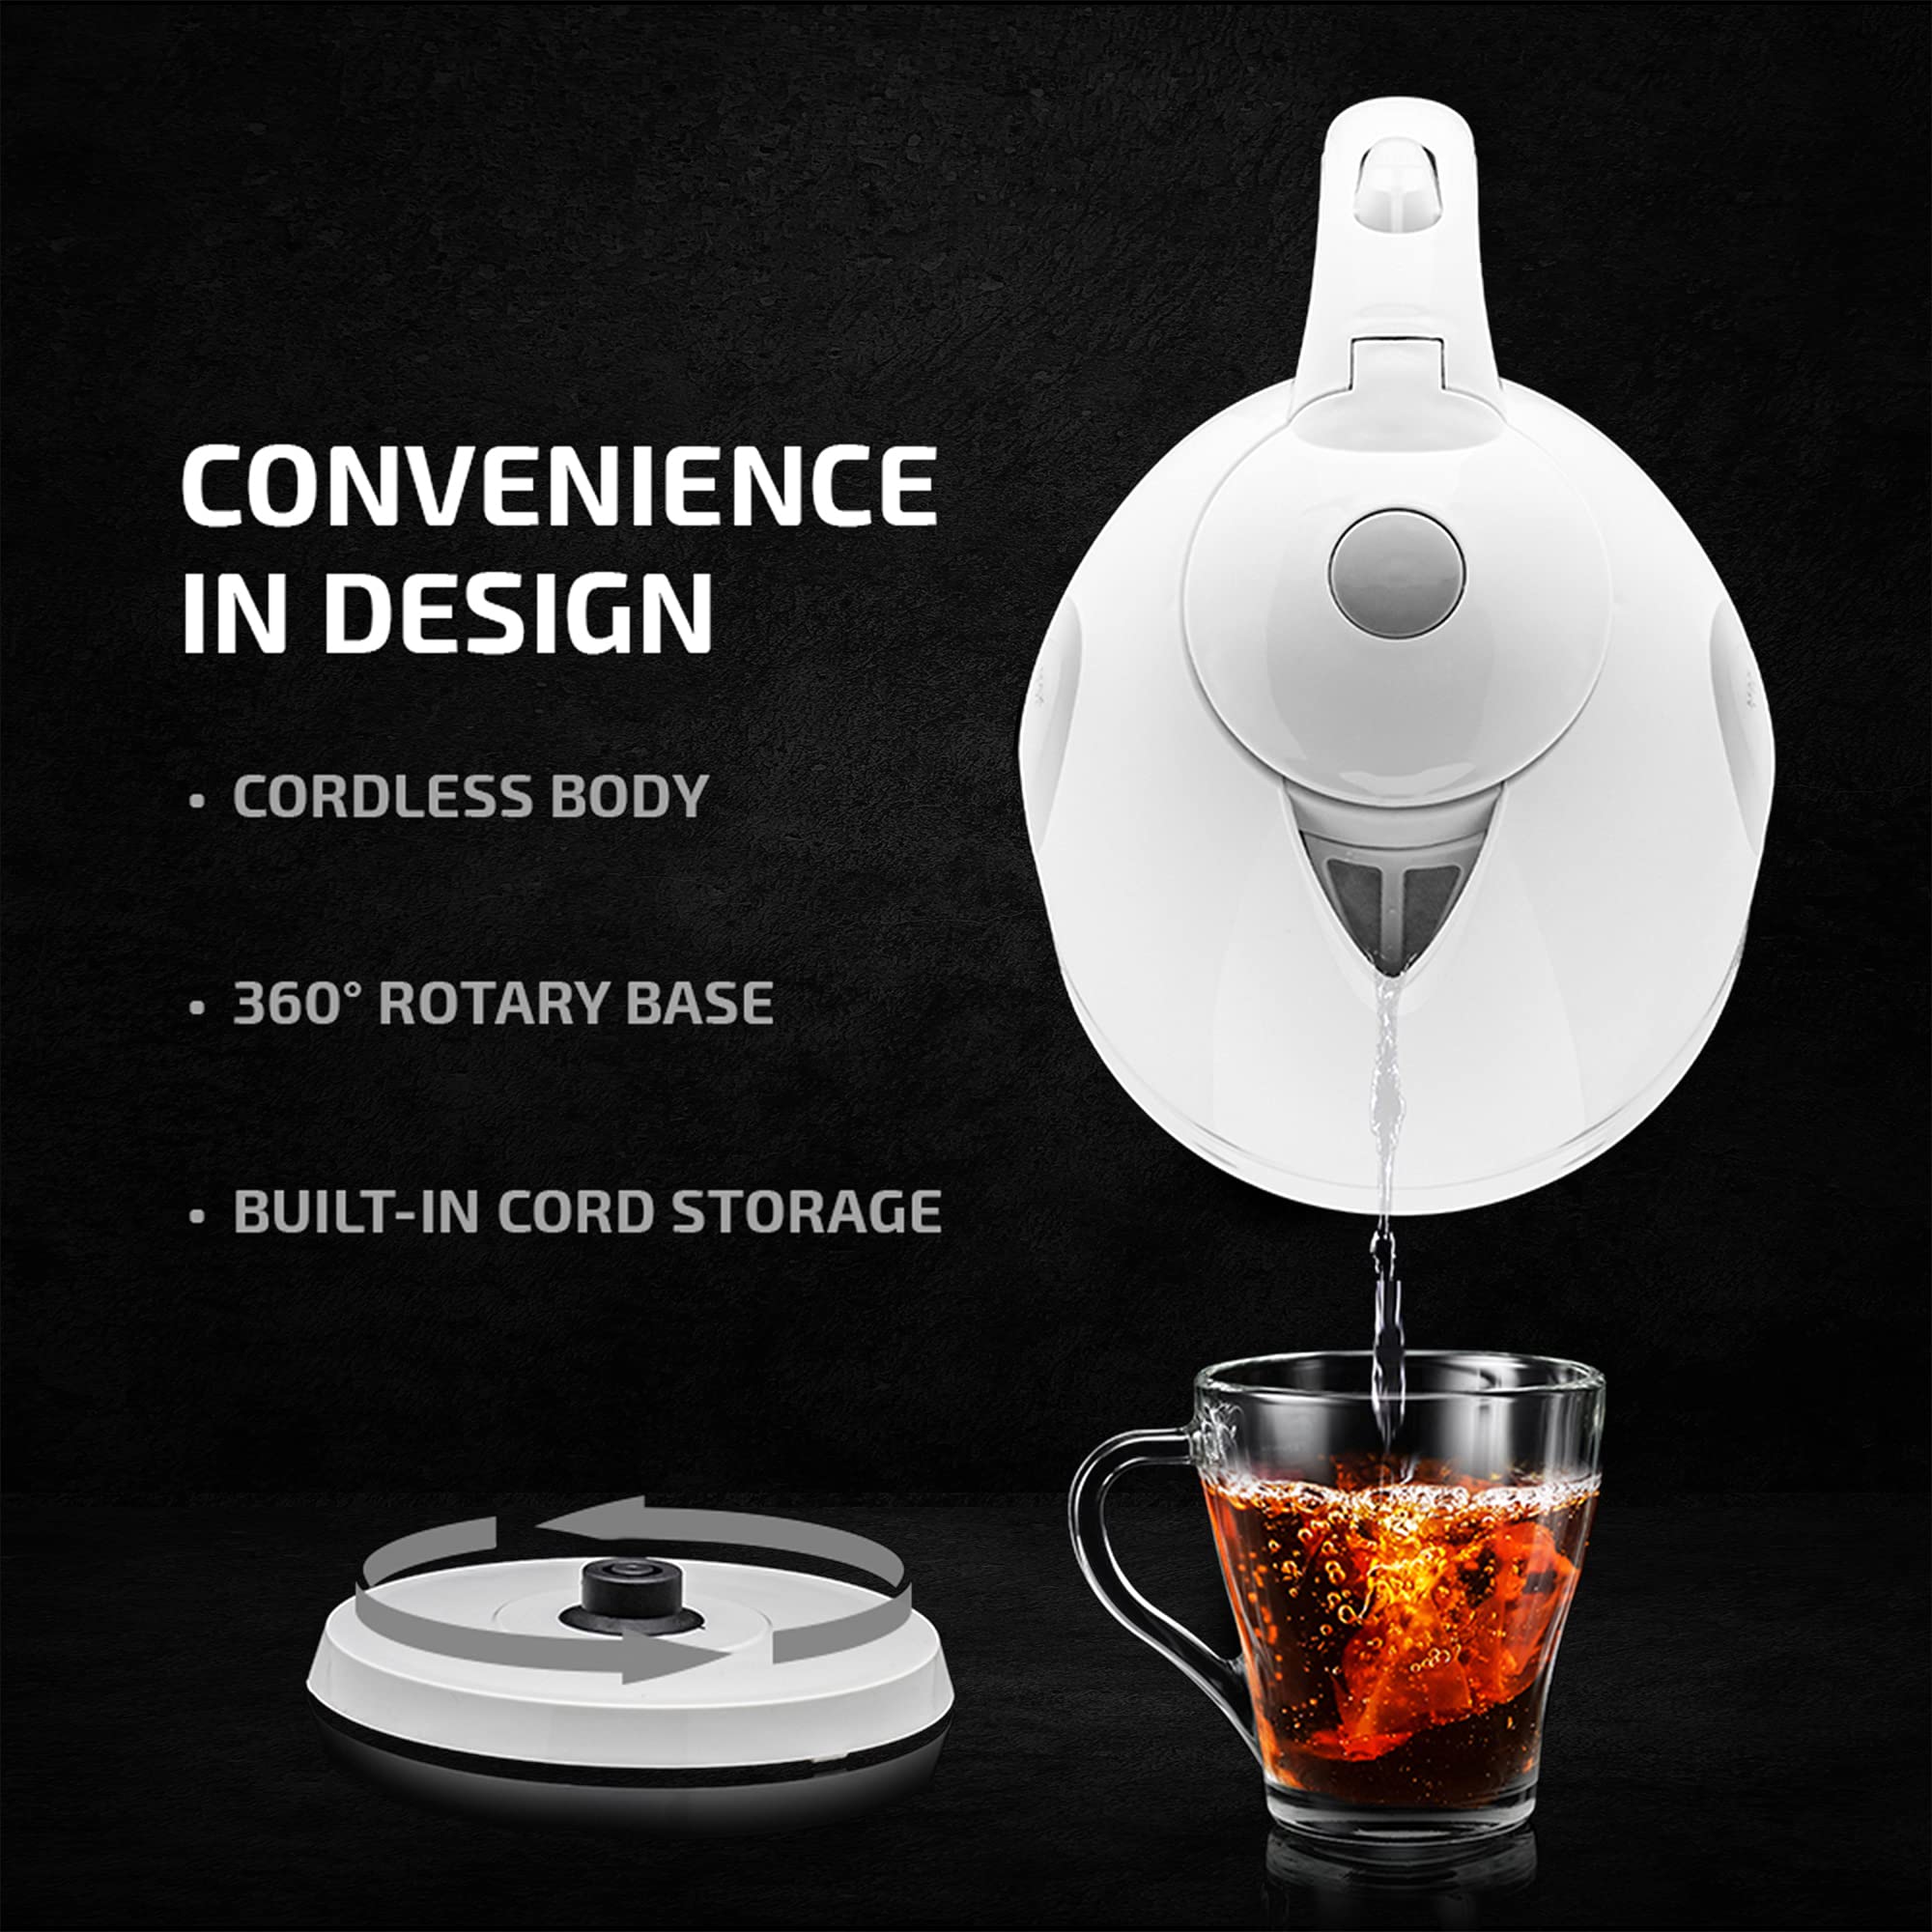 OVENTE Electric Kettle Hot Water Heater 1.7 Liter - BPA Free Fast Boiling Cordless Water Warmer - Auto Shut Off Instant Water Boiler for Coffee & Tea Pot - White KP72W